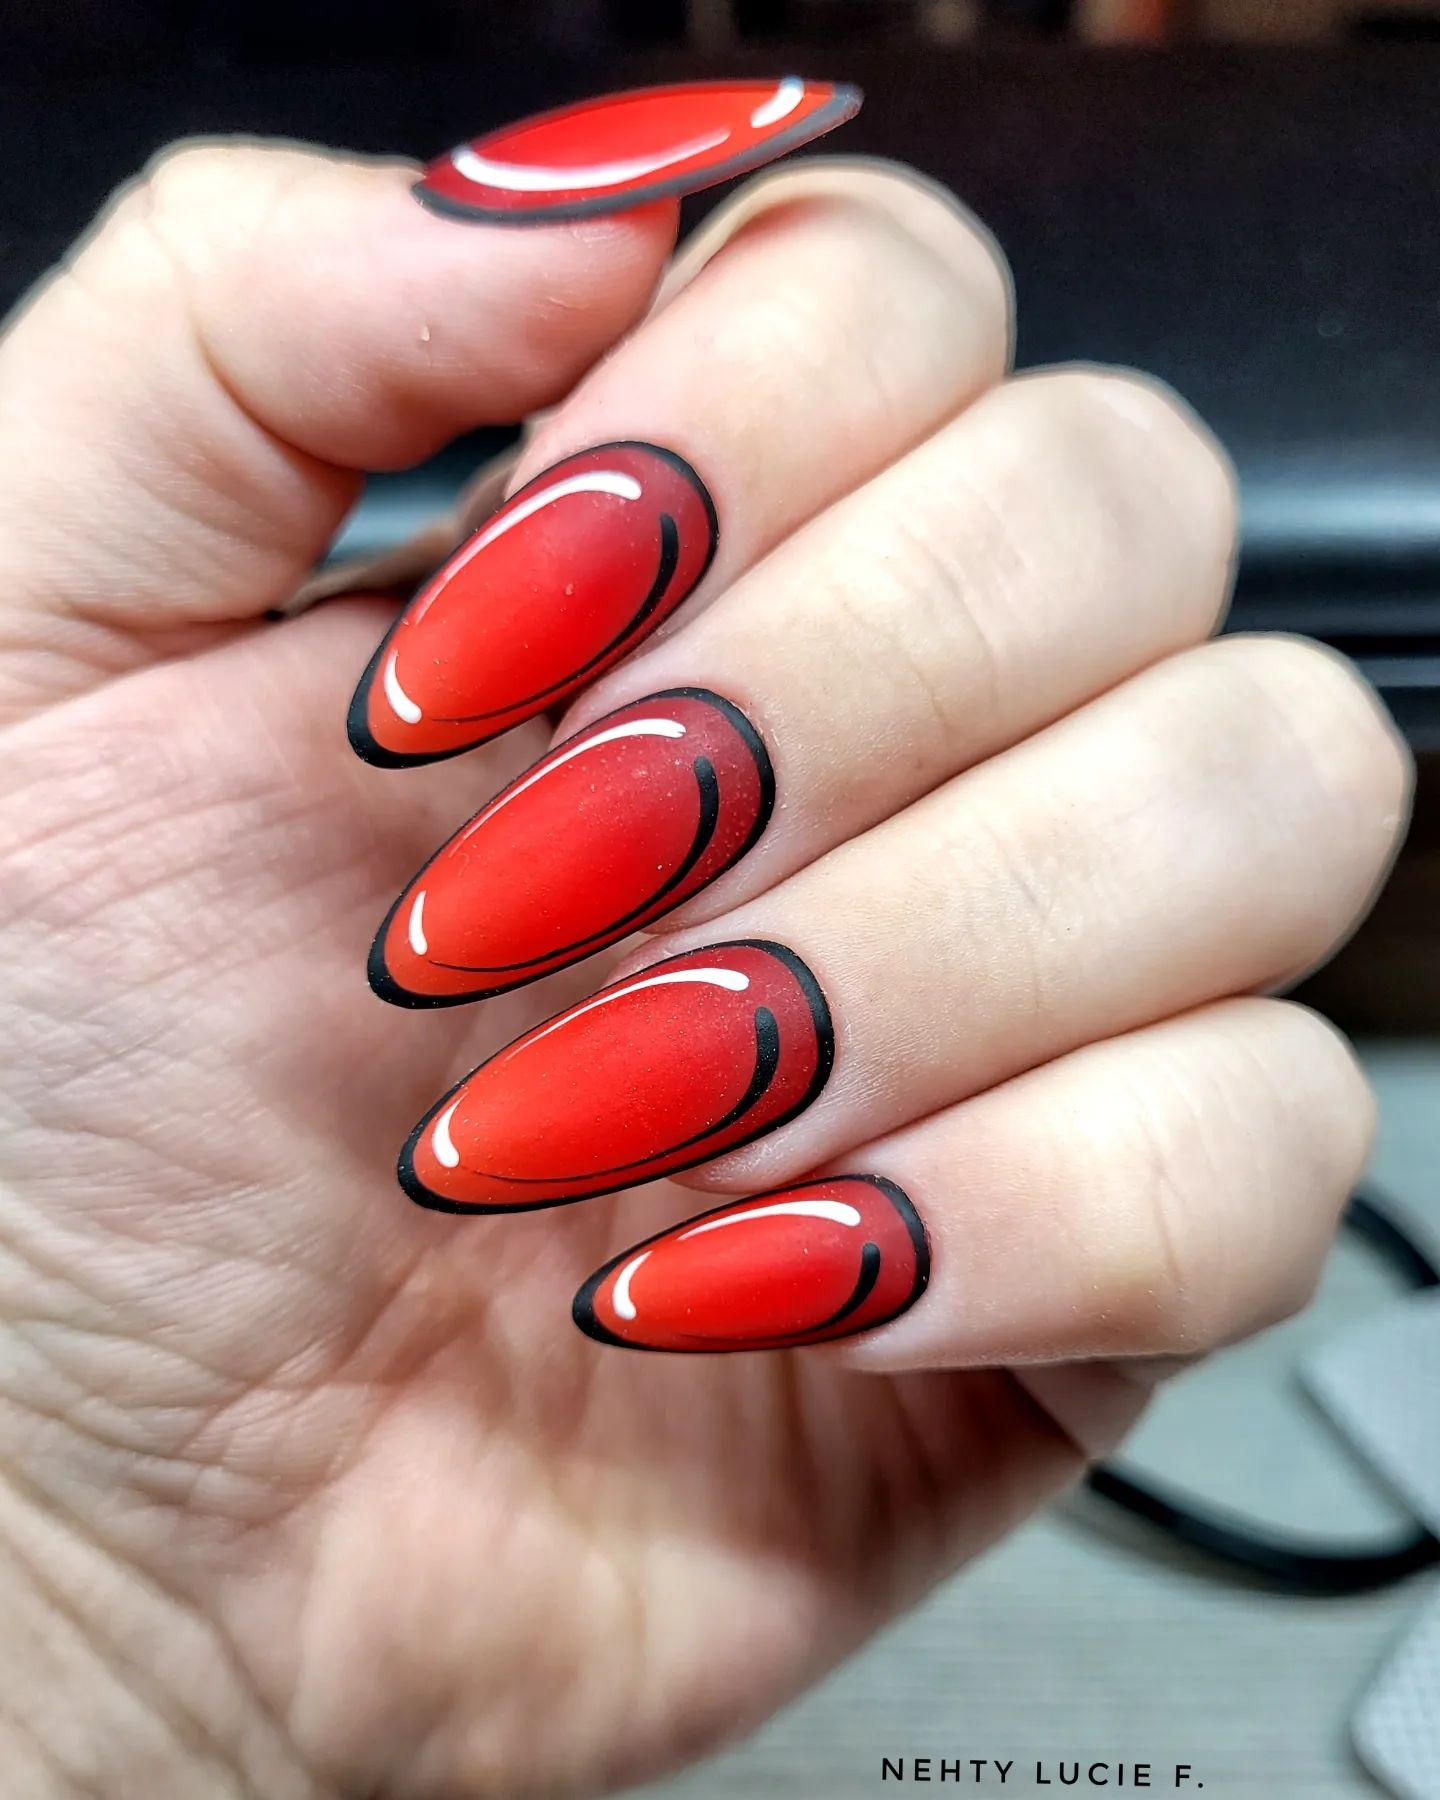 Black and Red Press on Design on Oval Nails